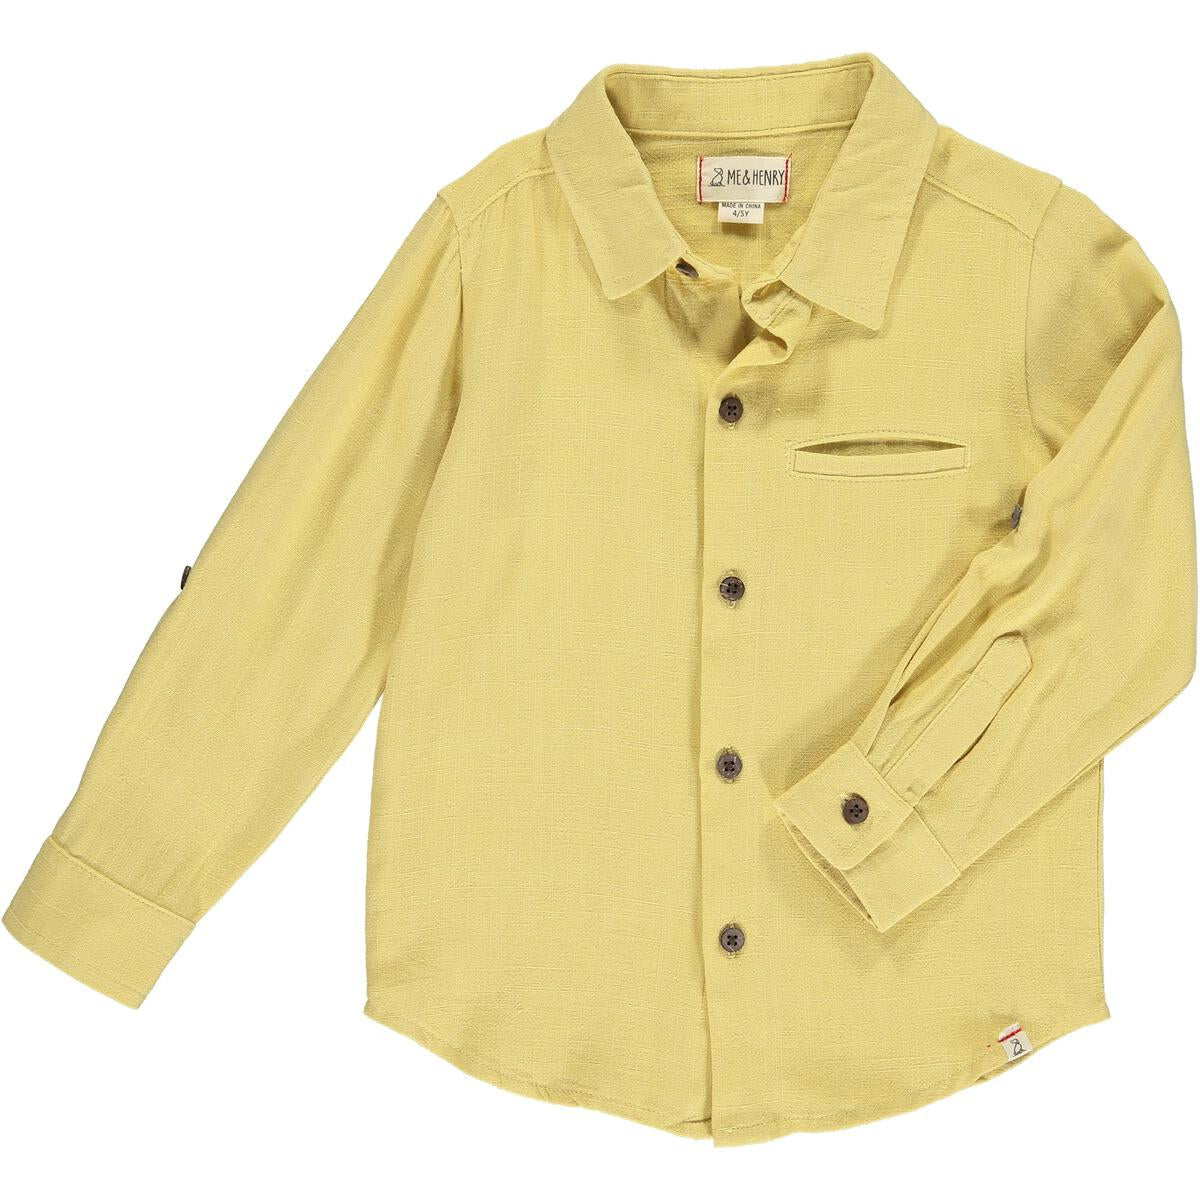 me and Henry Atwood gold button up longsleeve shirt, yellow, gold, long sleeve, lightweight, cotton, pocket, fall, little boy, toddler